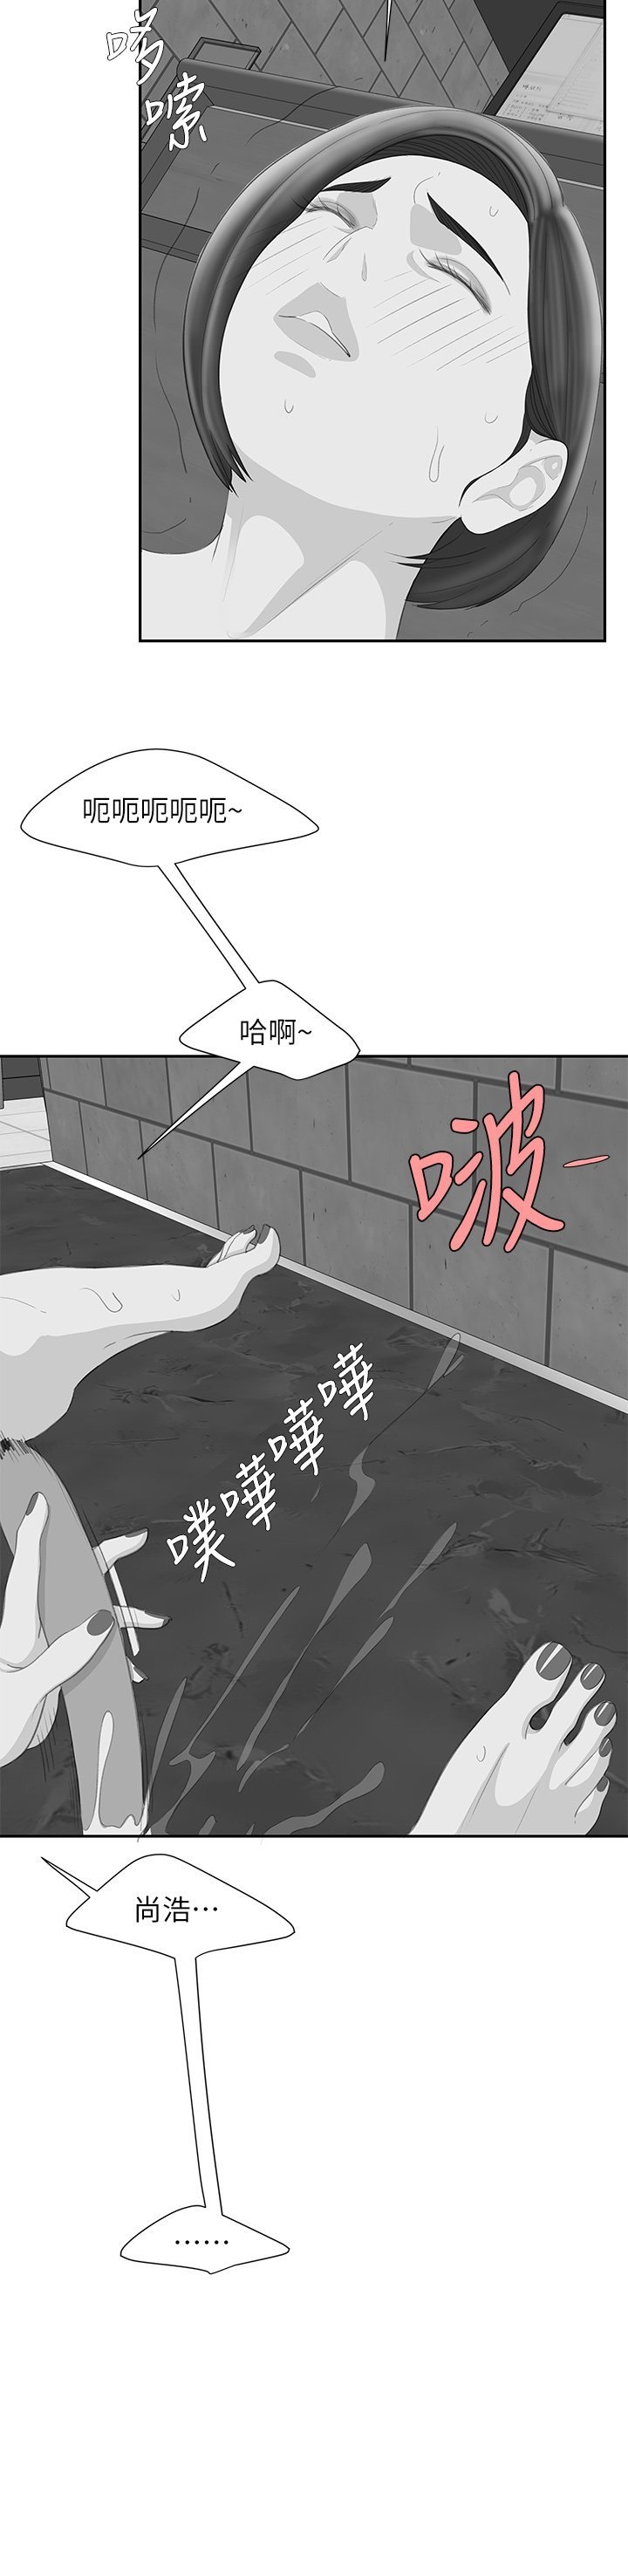 The Delivery Man Raw - Chapter 56 Page 7